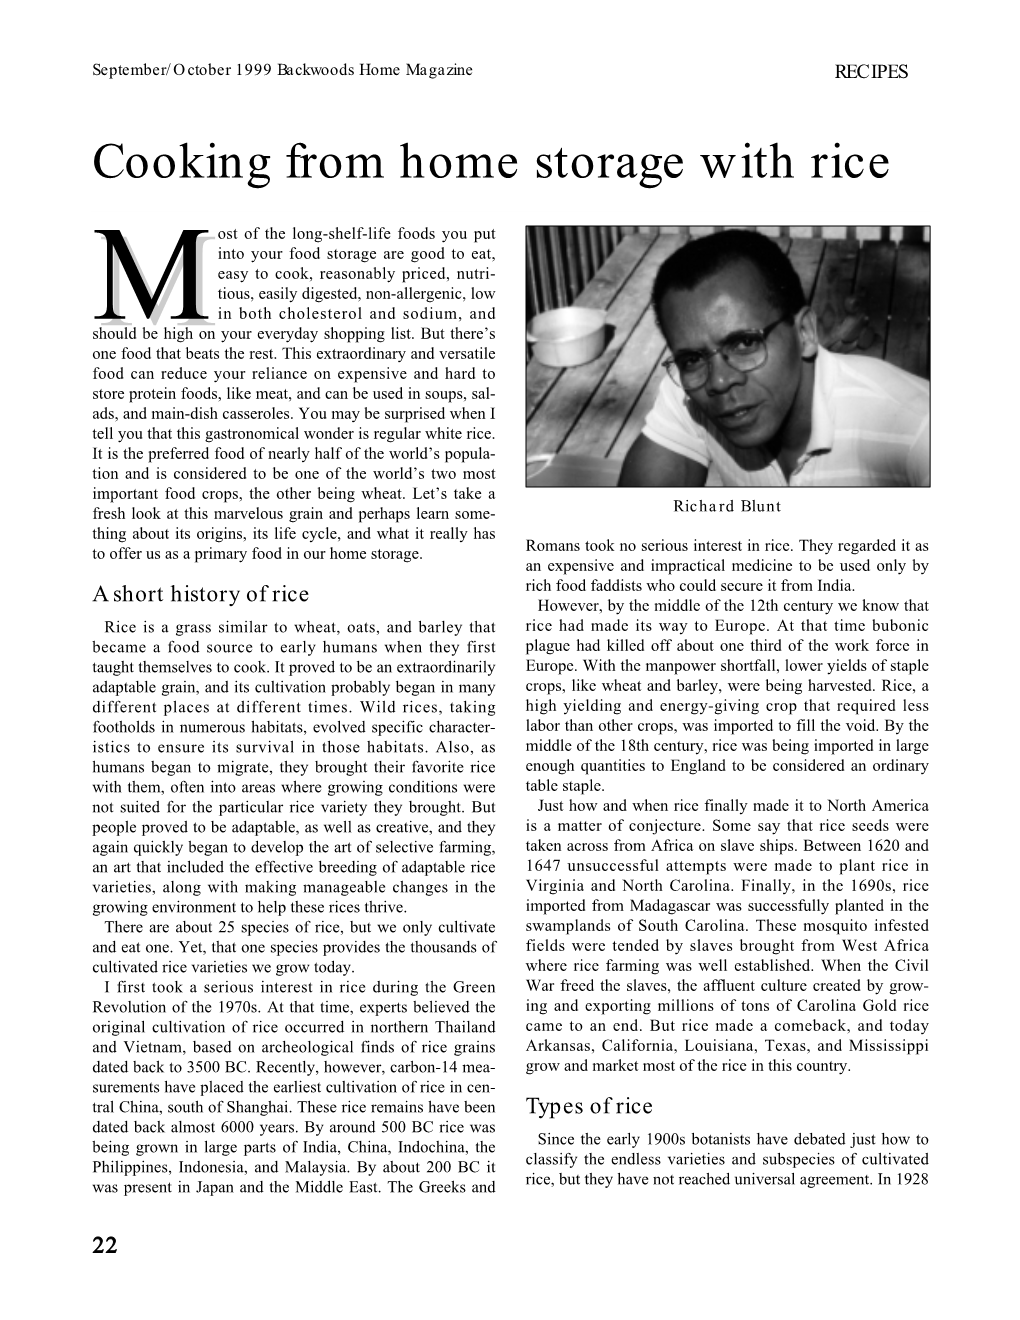 Cooking from Home Storage with Rice…By Richard Blunt.Pdf